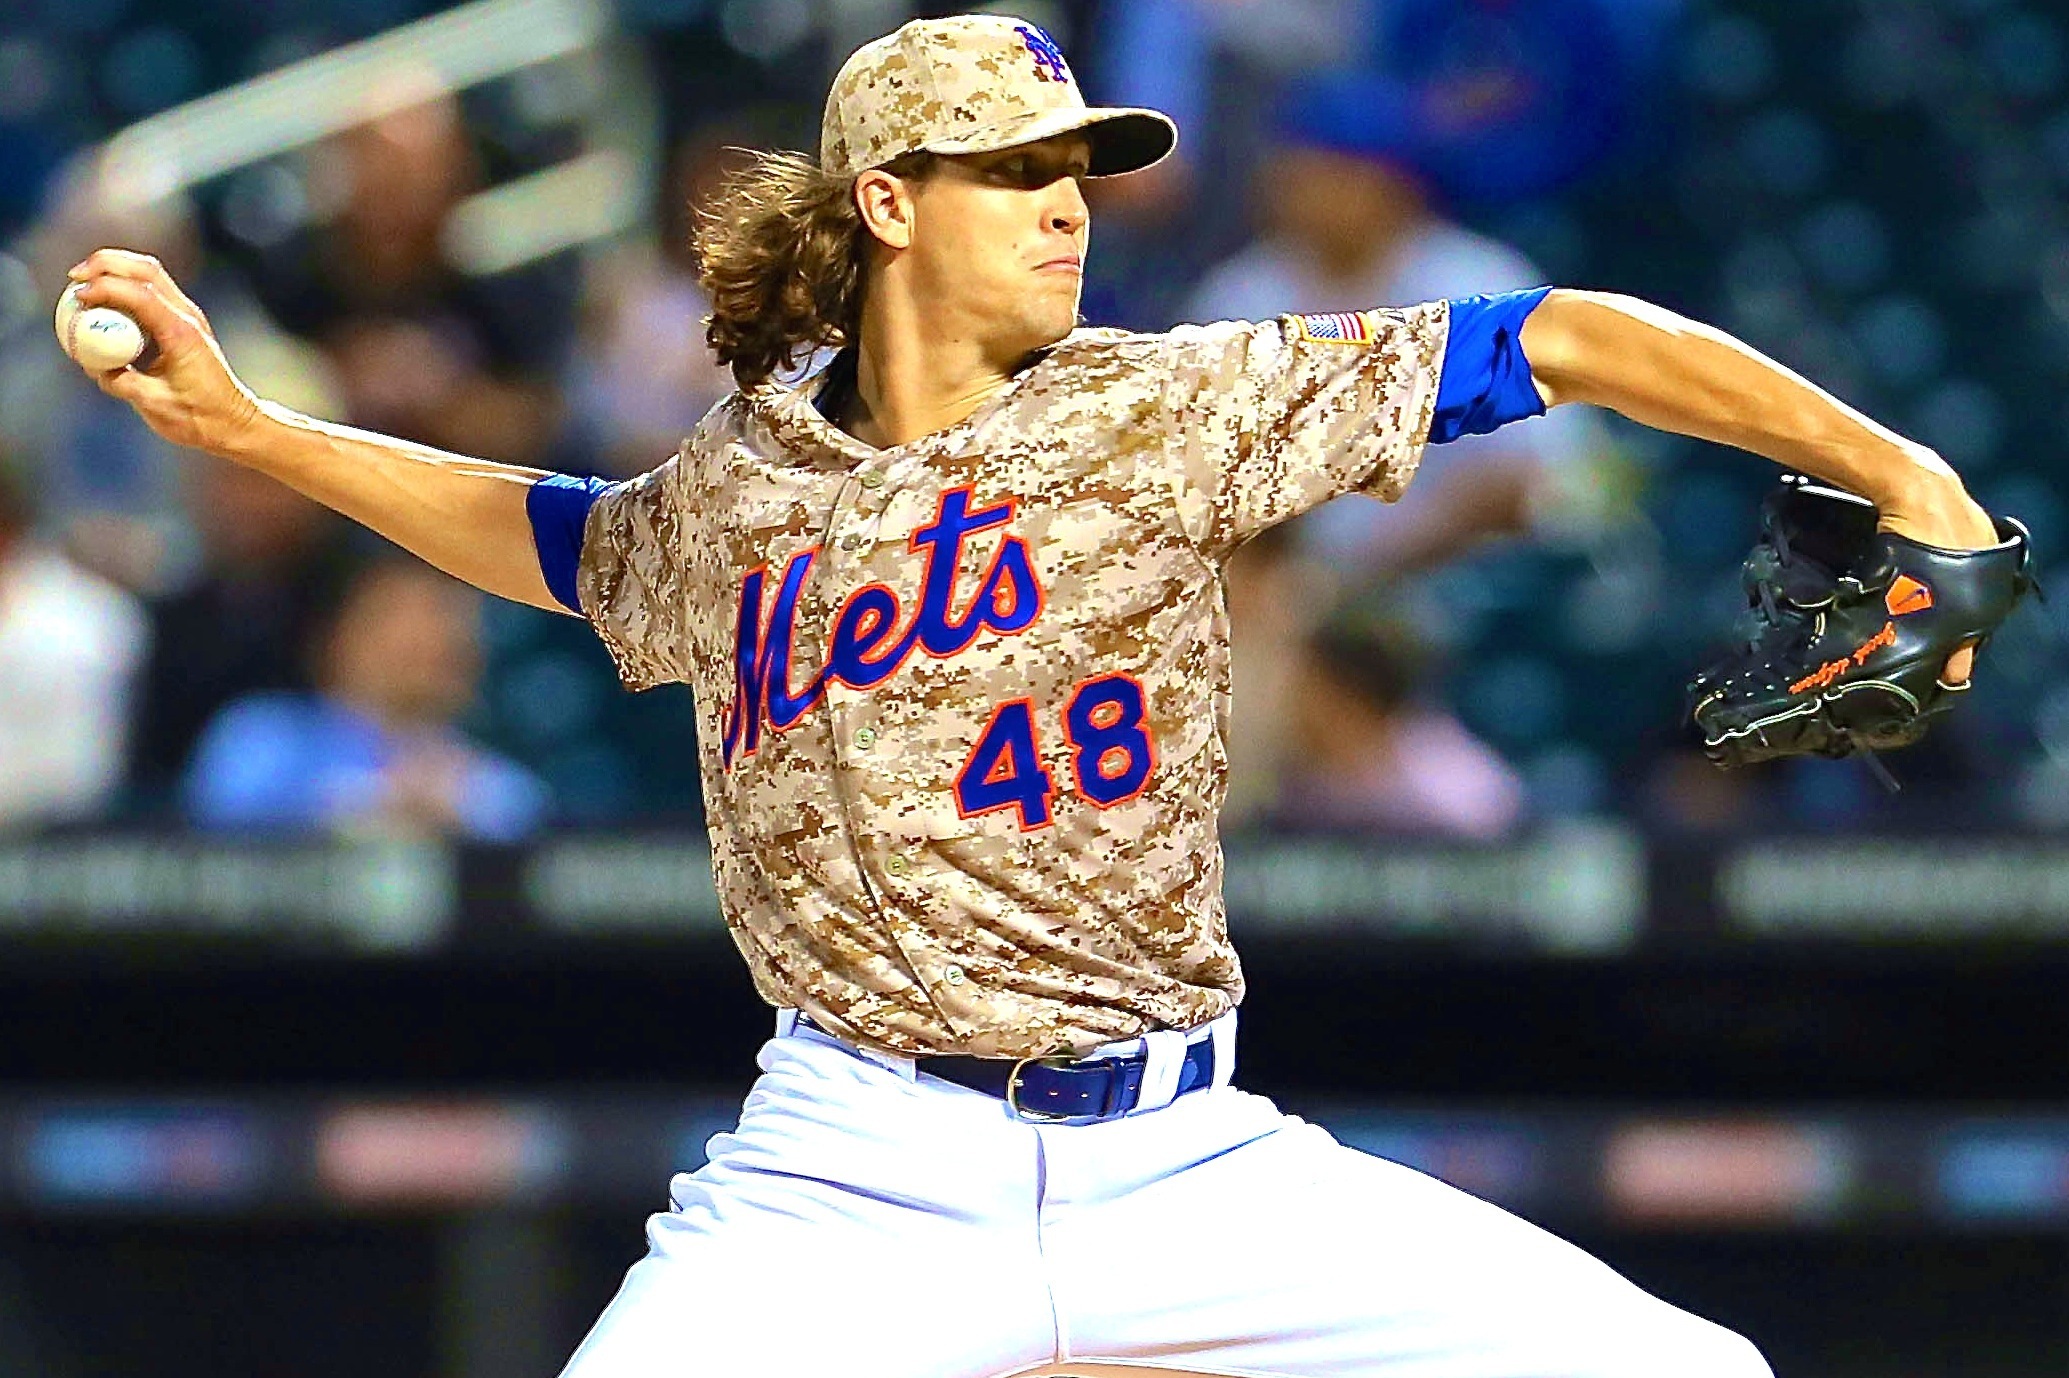 Jacob deGrom Ties MLB Record by Striking out 8 Straight Batters vs